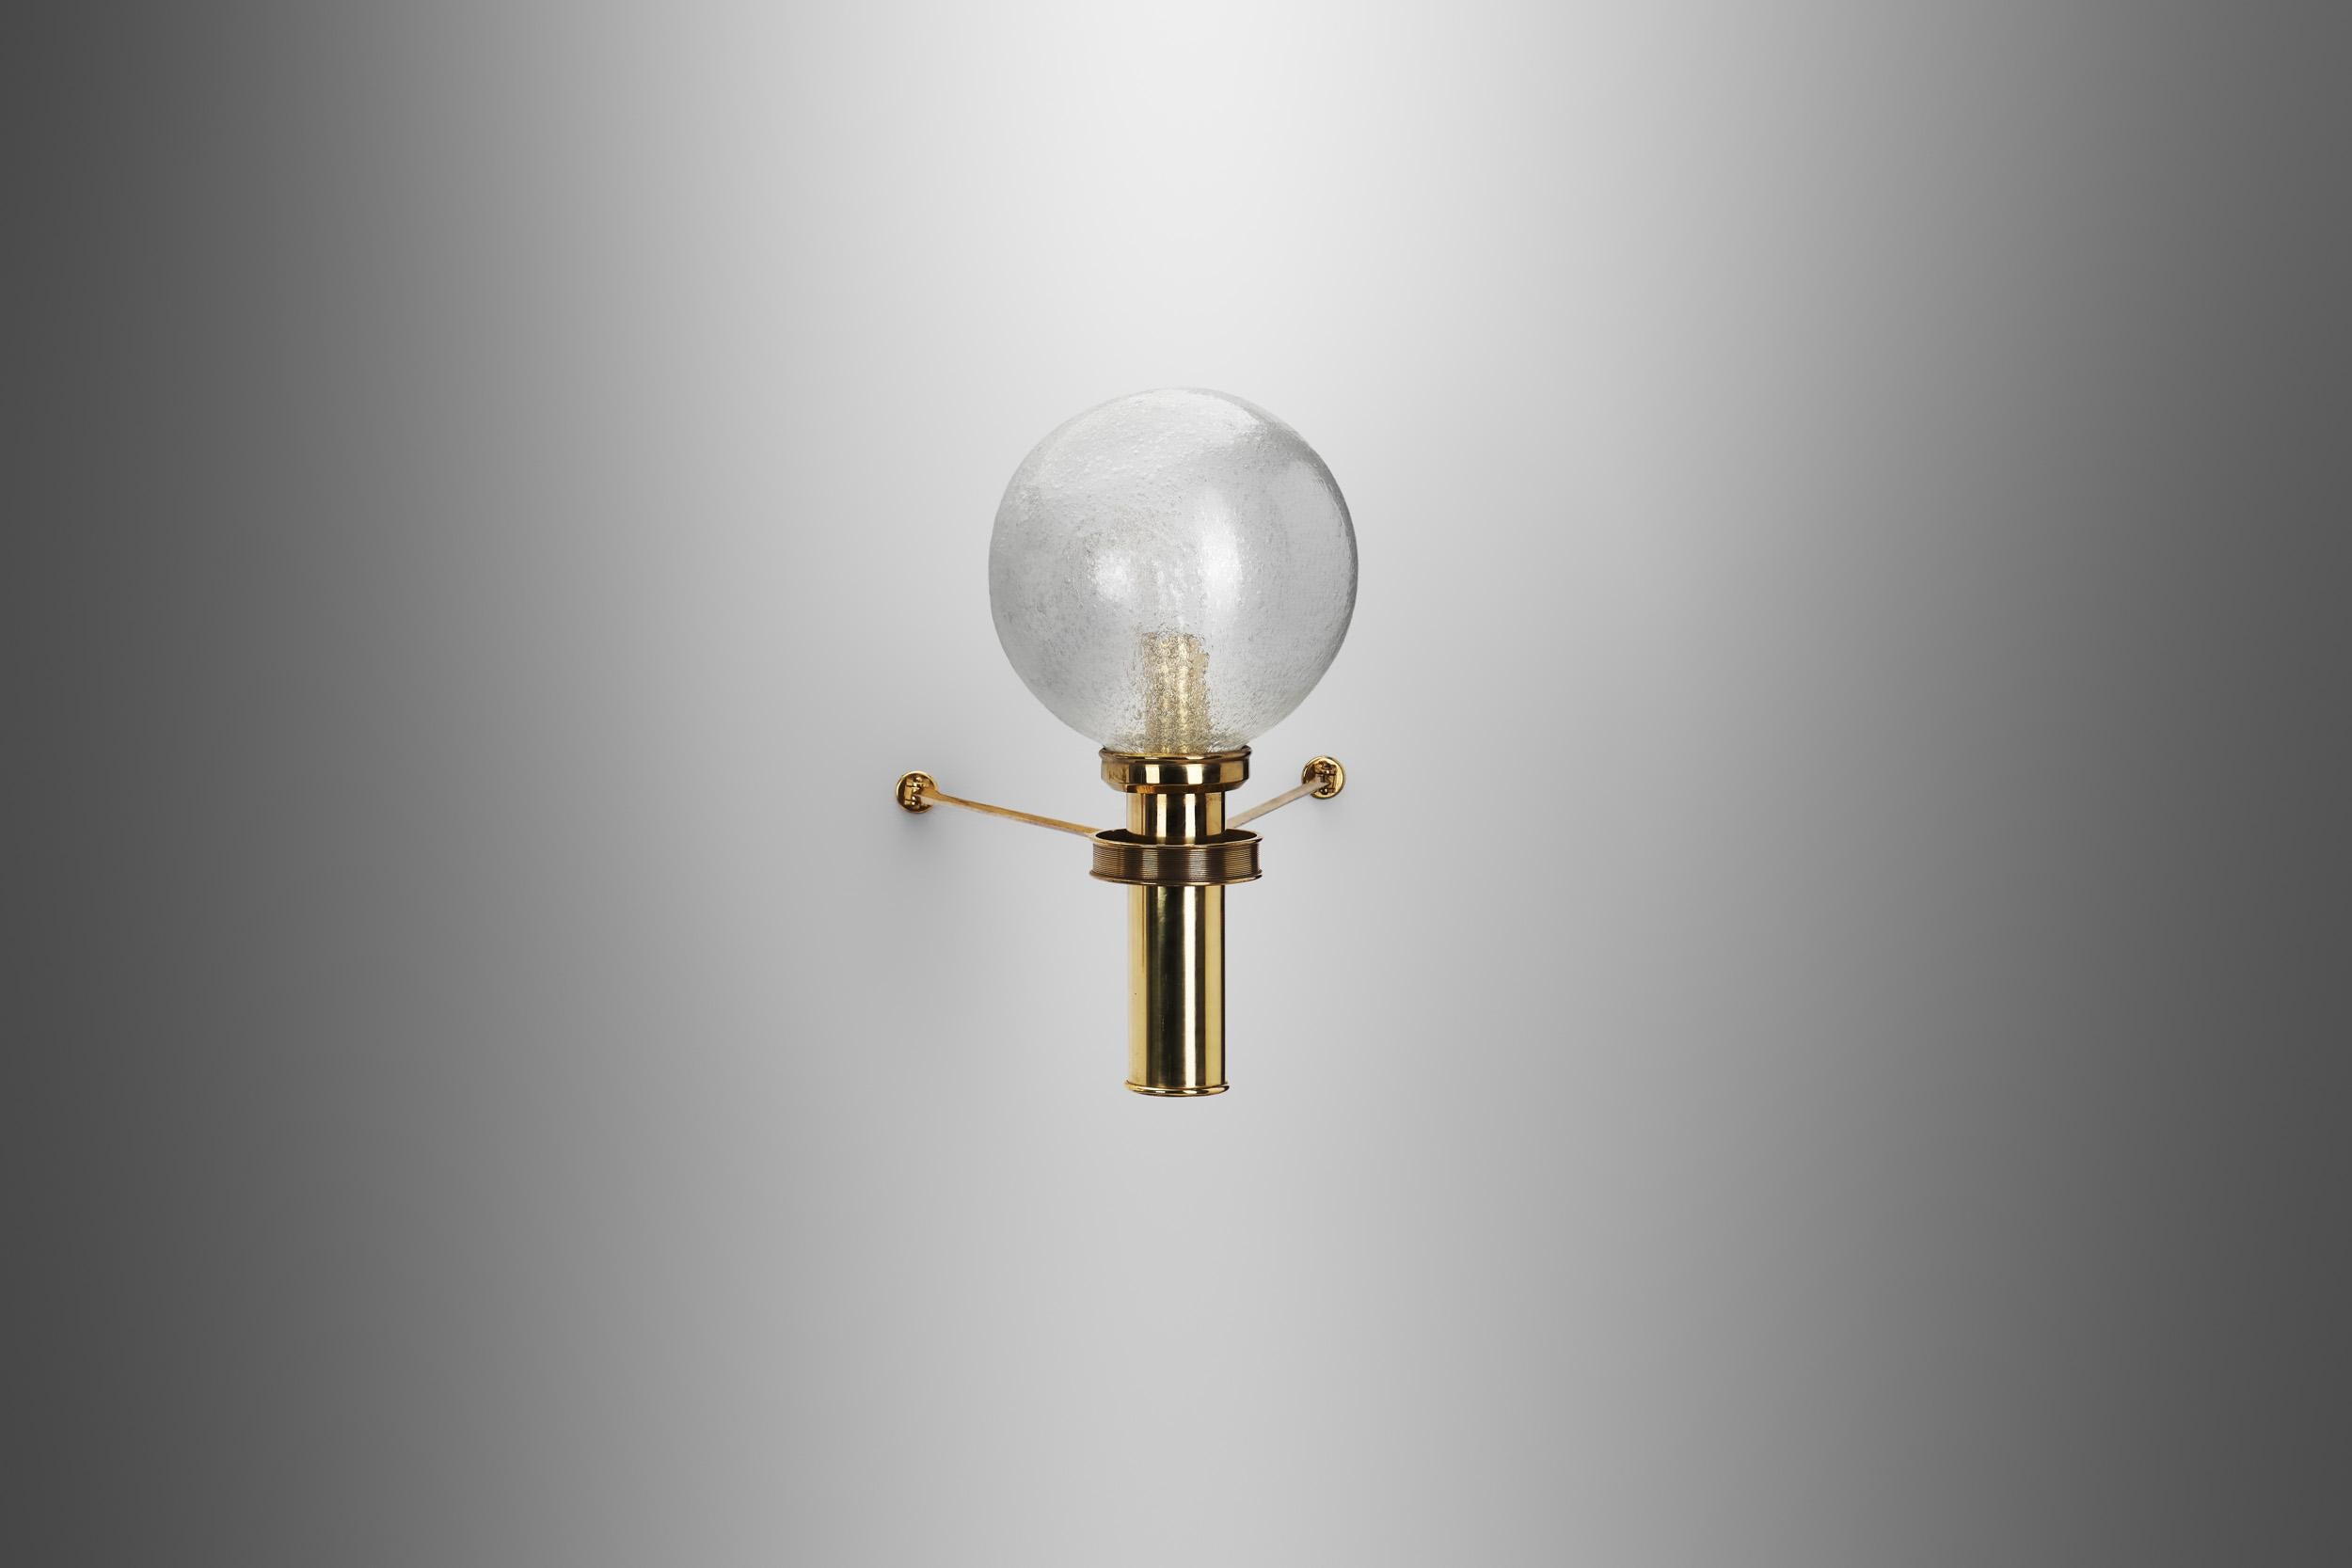 Mid-20th Century Large European Modern Wall Sconce in Brass & Bubble Glass, Europe circa 1950s For Sale